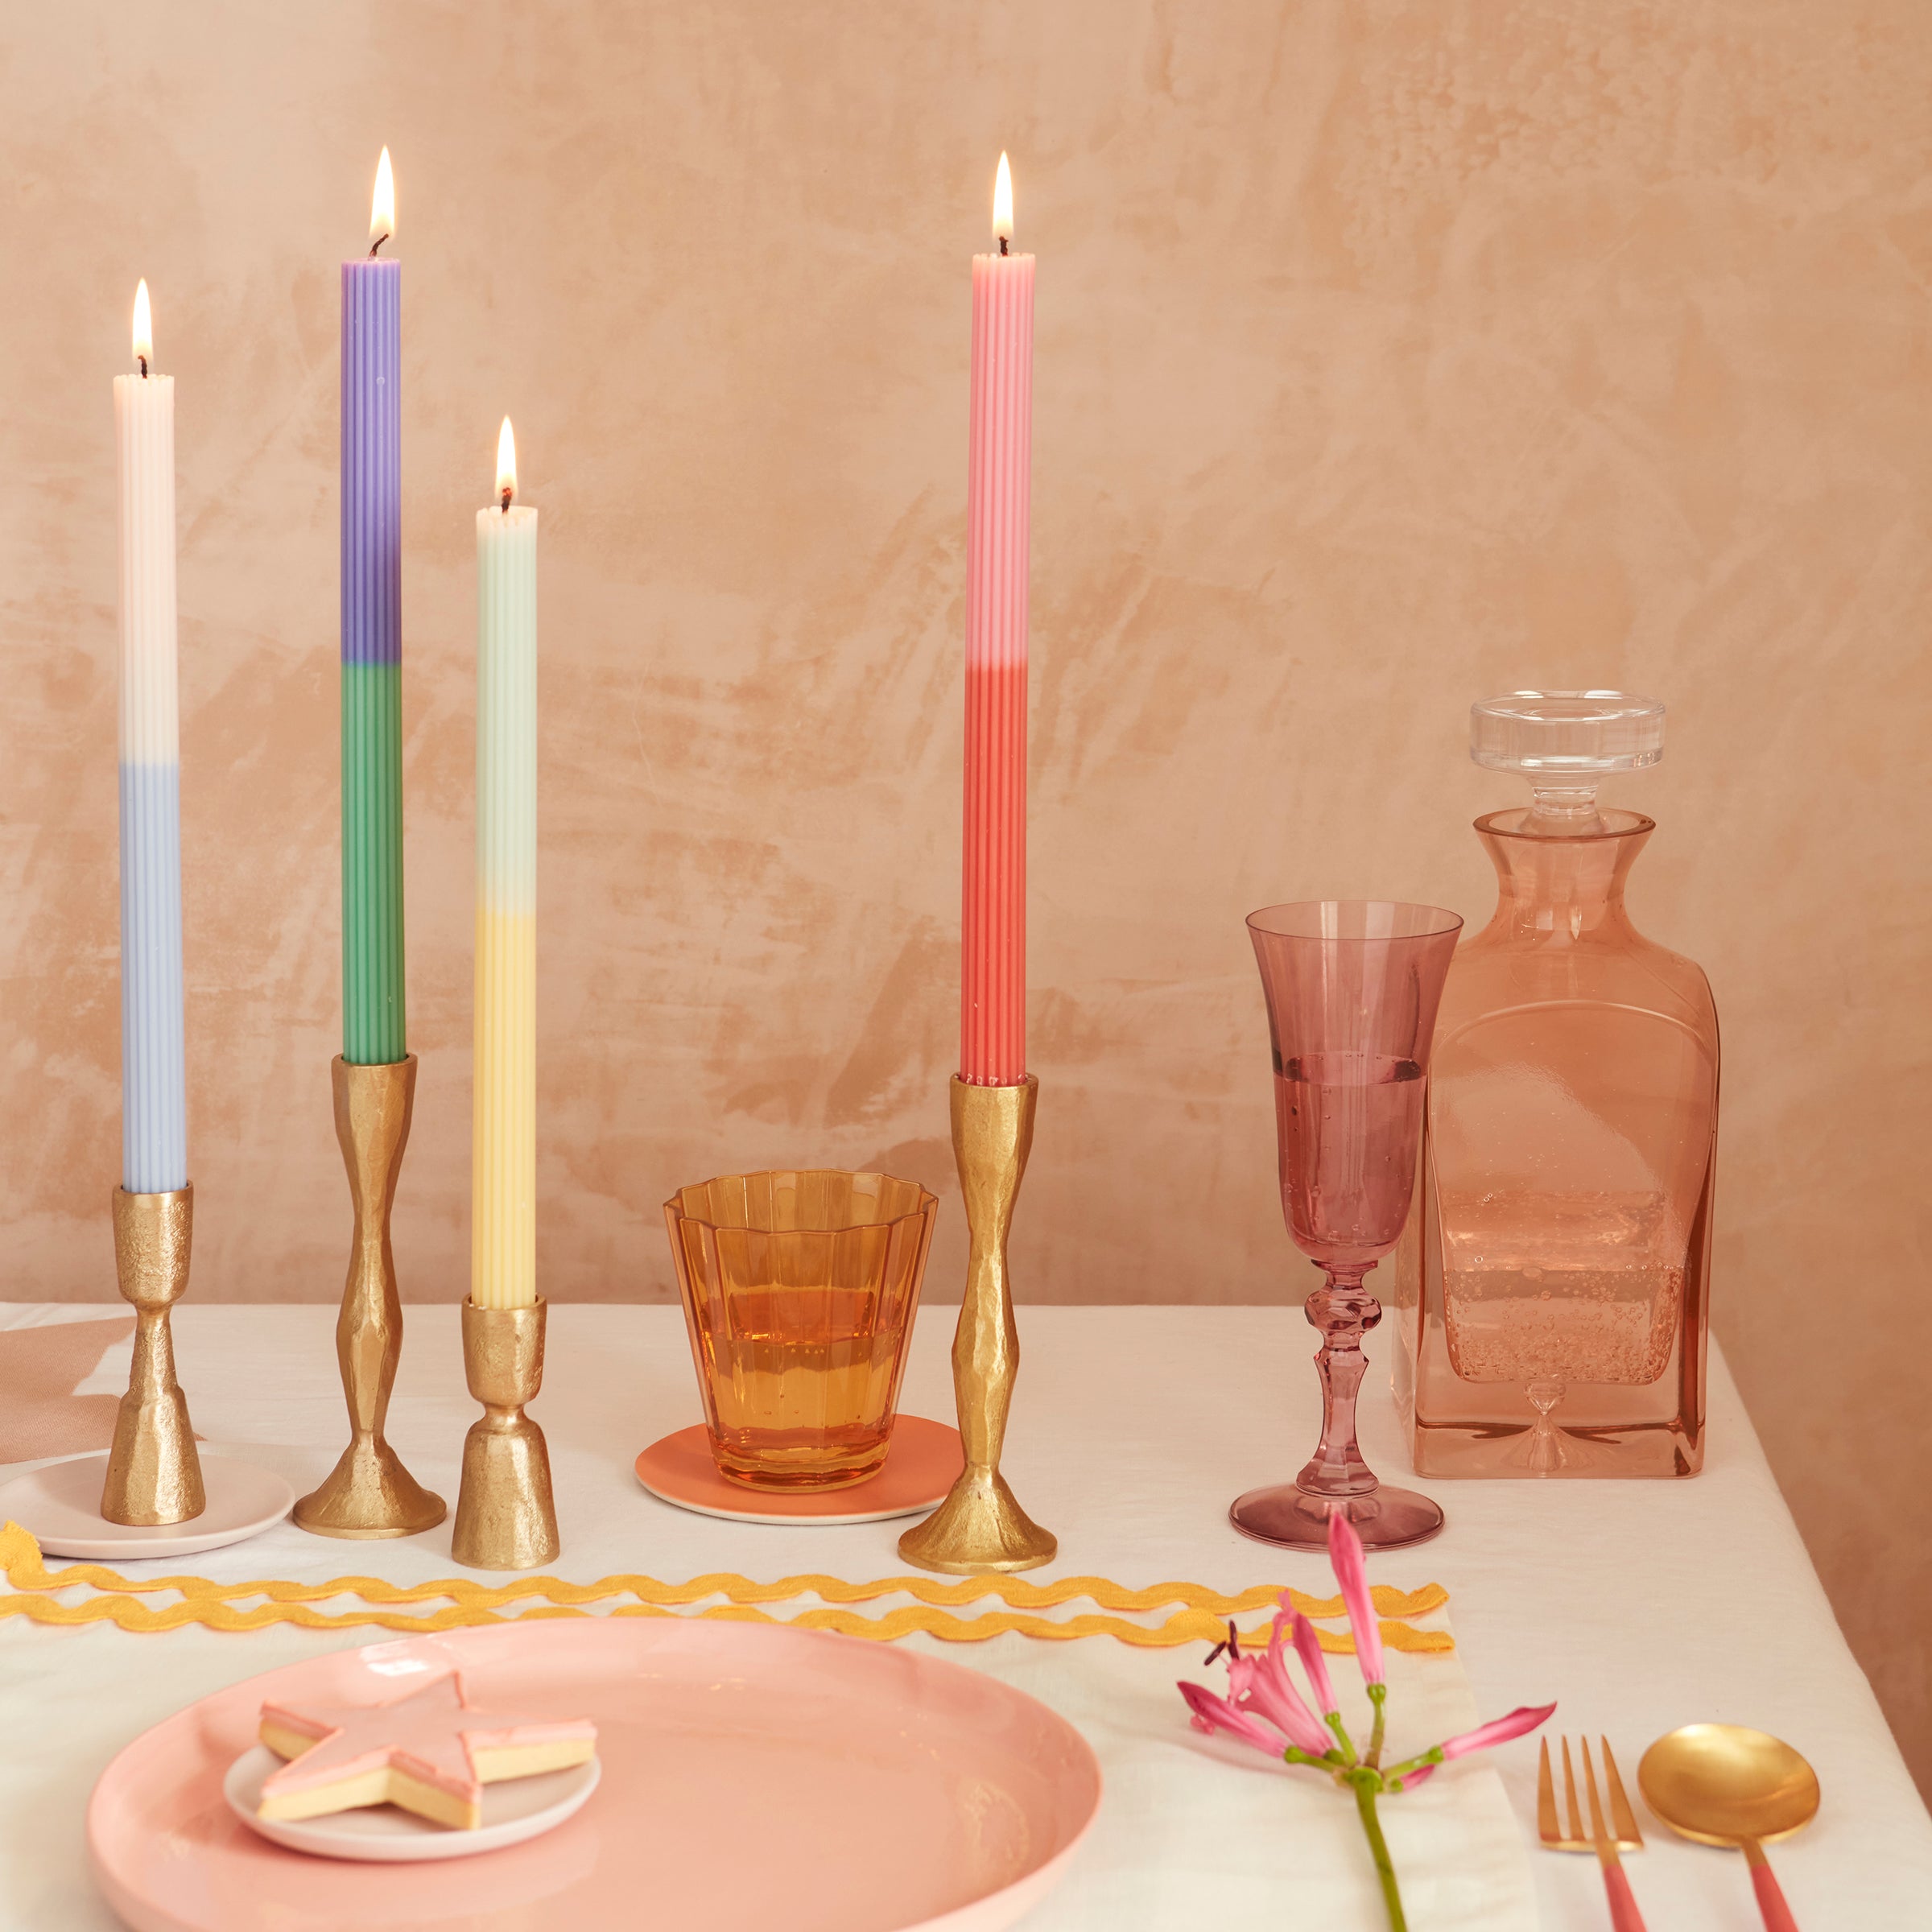 Our table candles are colorful and will look amazing as party table decorations.